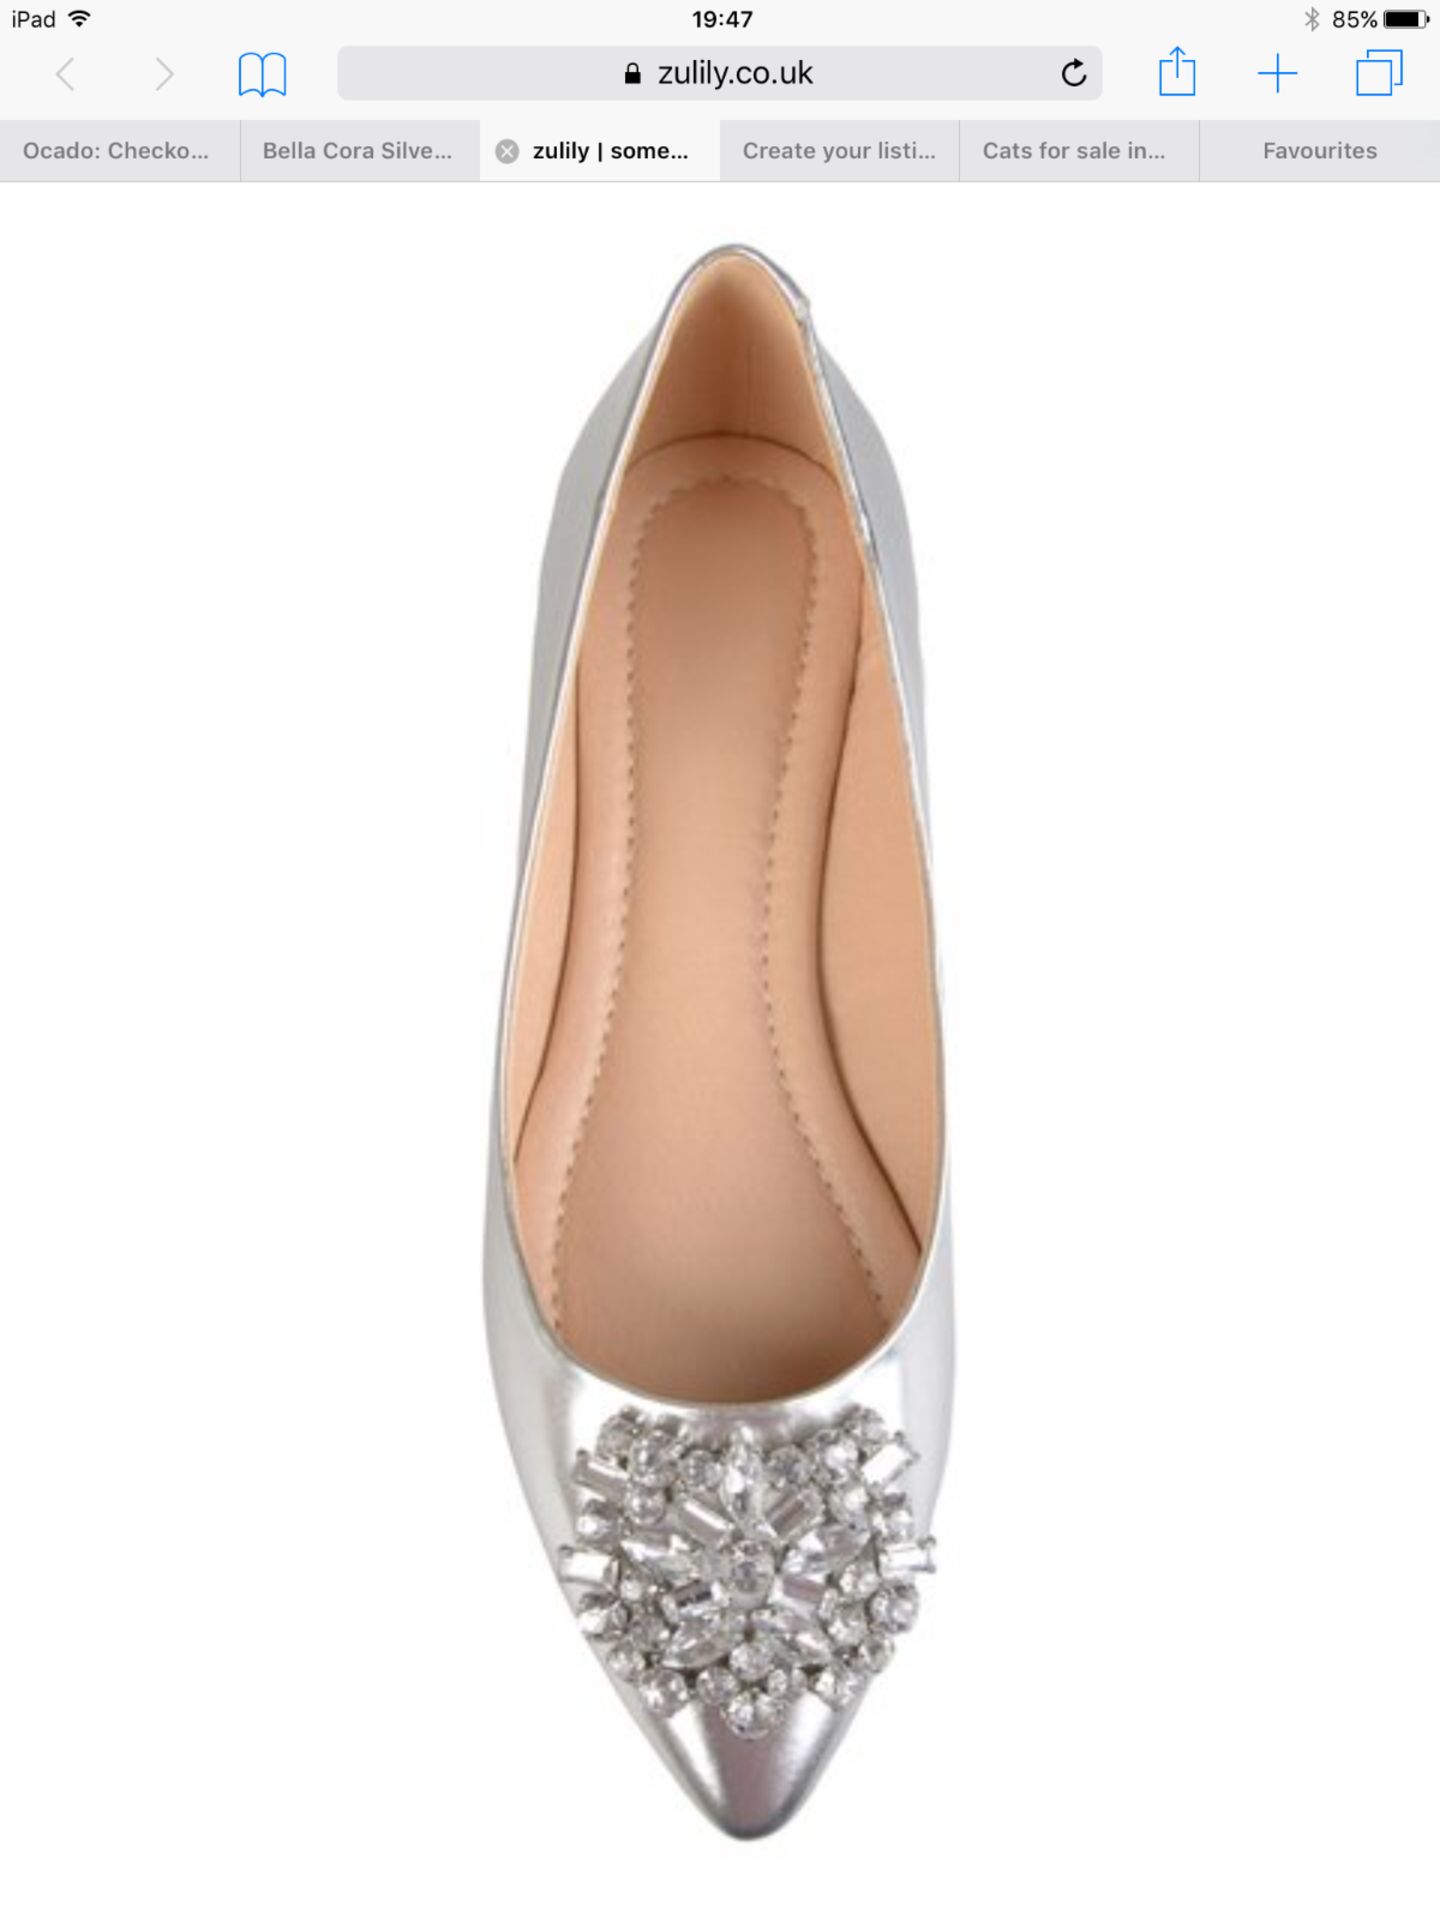 Bella Cora Silver Rena Ballet Flat, Size Uk 4.5 Us 7 (New With Box) [Ref: 53391740 G4]-Tf - Image 4 of 6